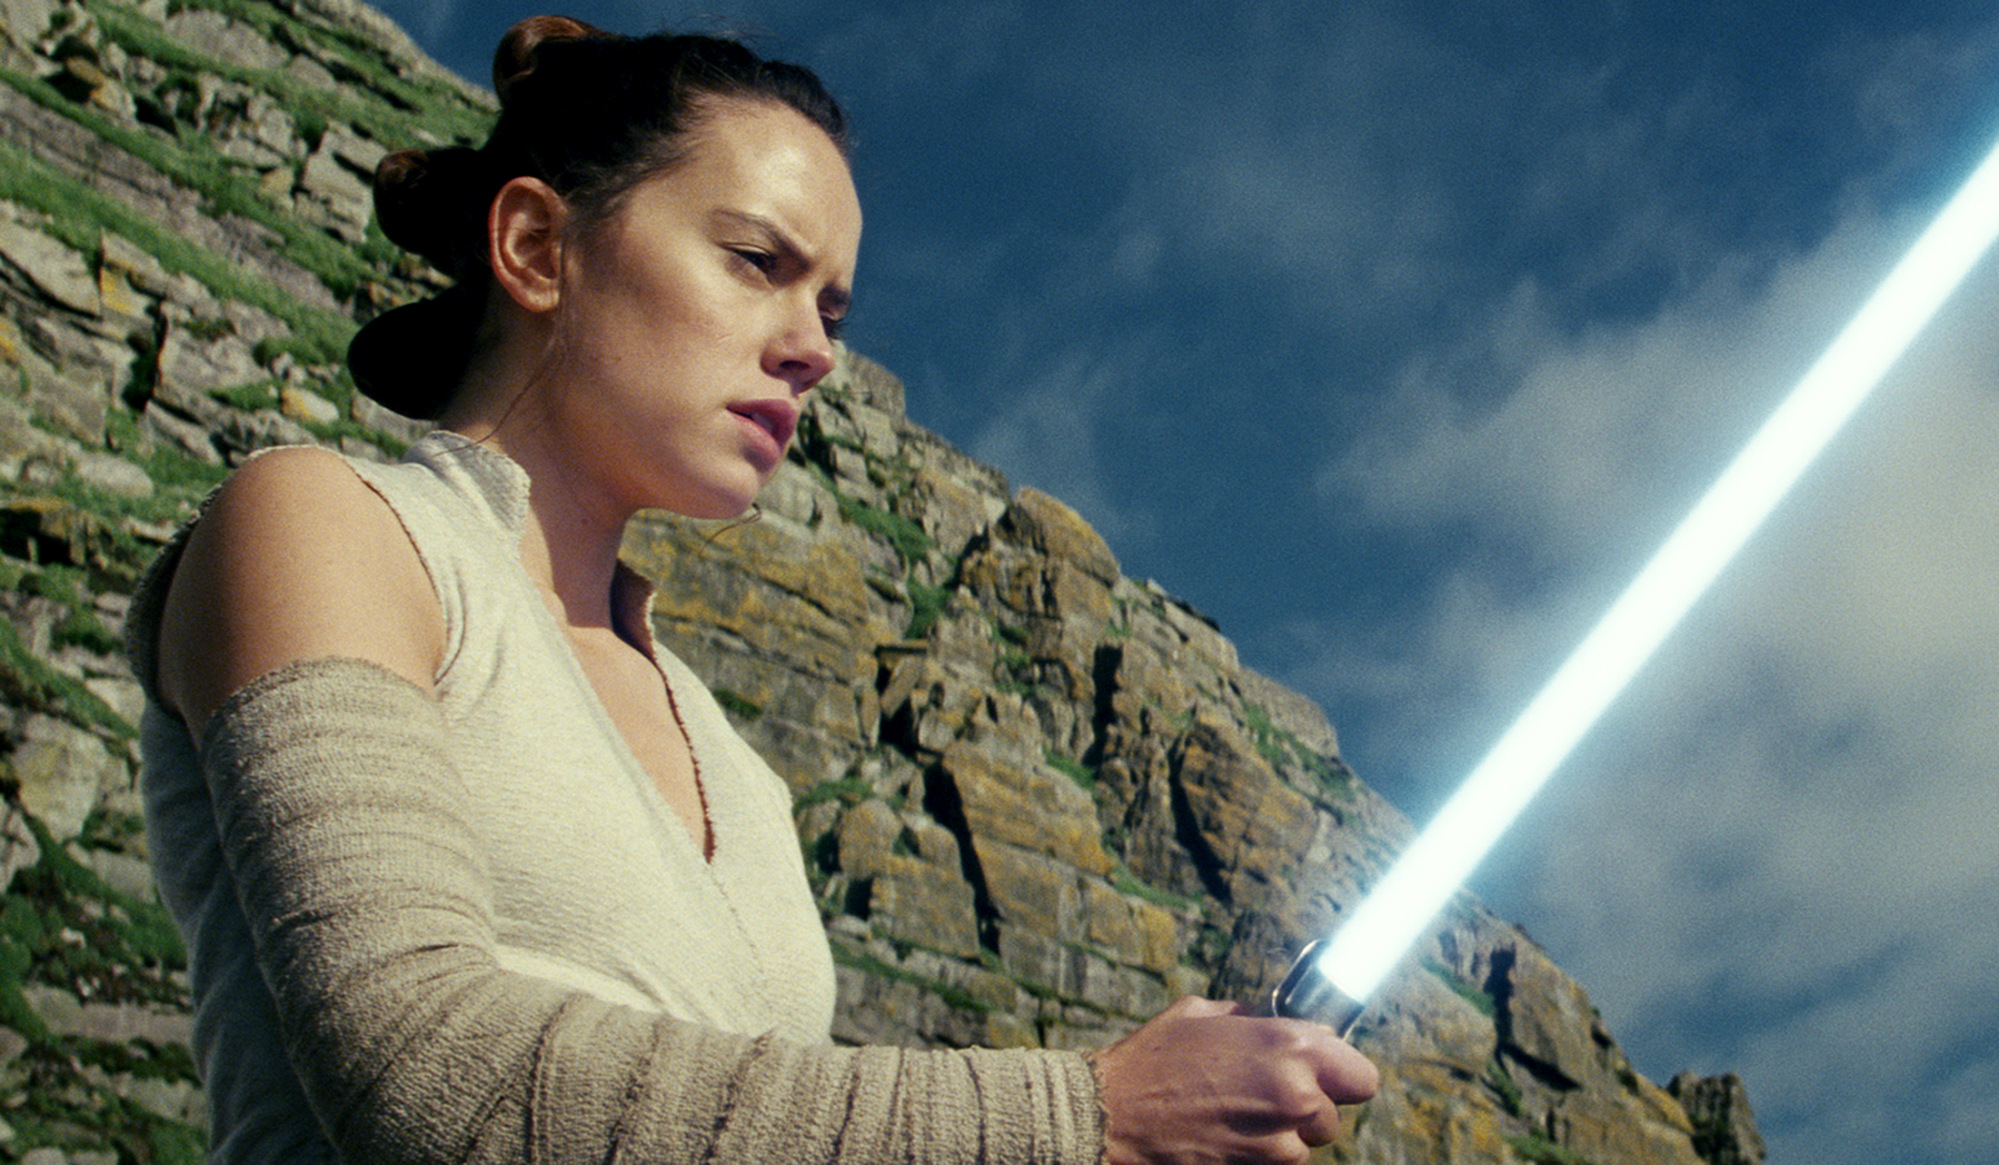 The Last Jedi' Is Good. It Just Isn't Magical. - Bloomberg